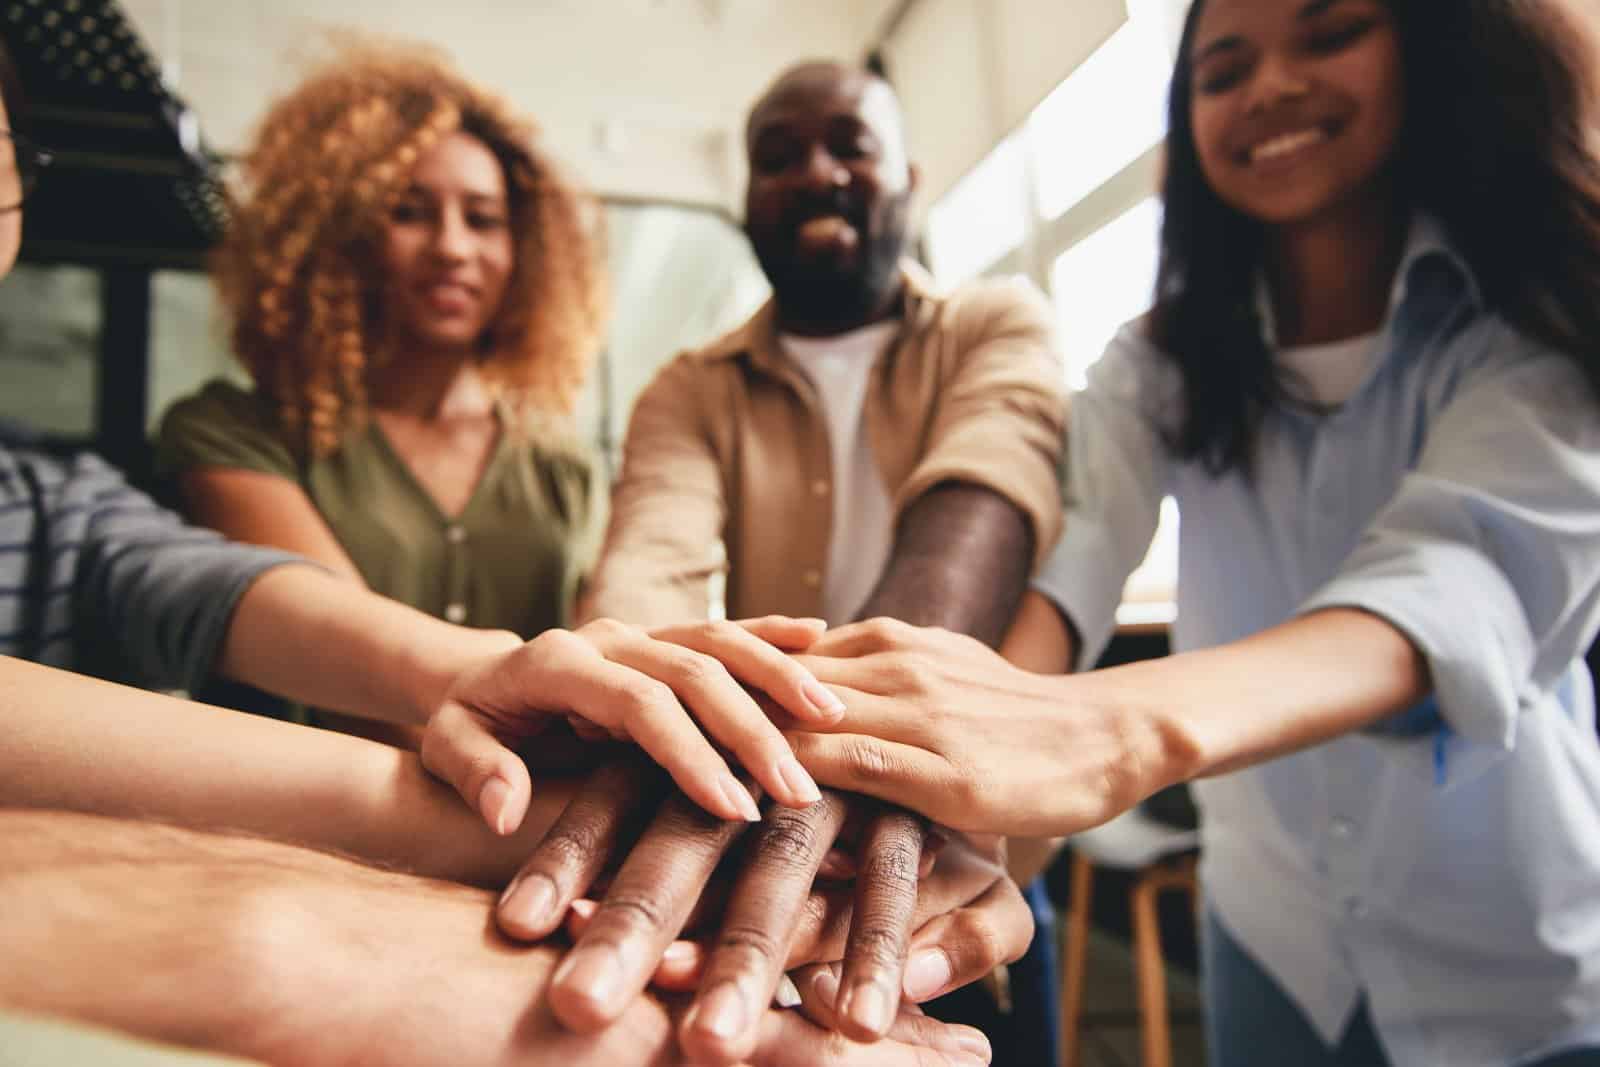 Image Credit: Shutterstock / Kostiantyn Voitenko <p><span>When people describe their circle of friends as ‘diverse’ and you’re the only LGBTQ+ person they know.</span></p>